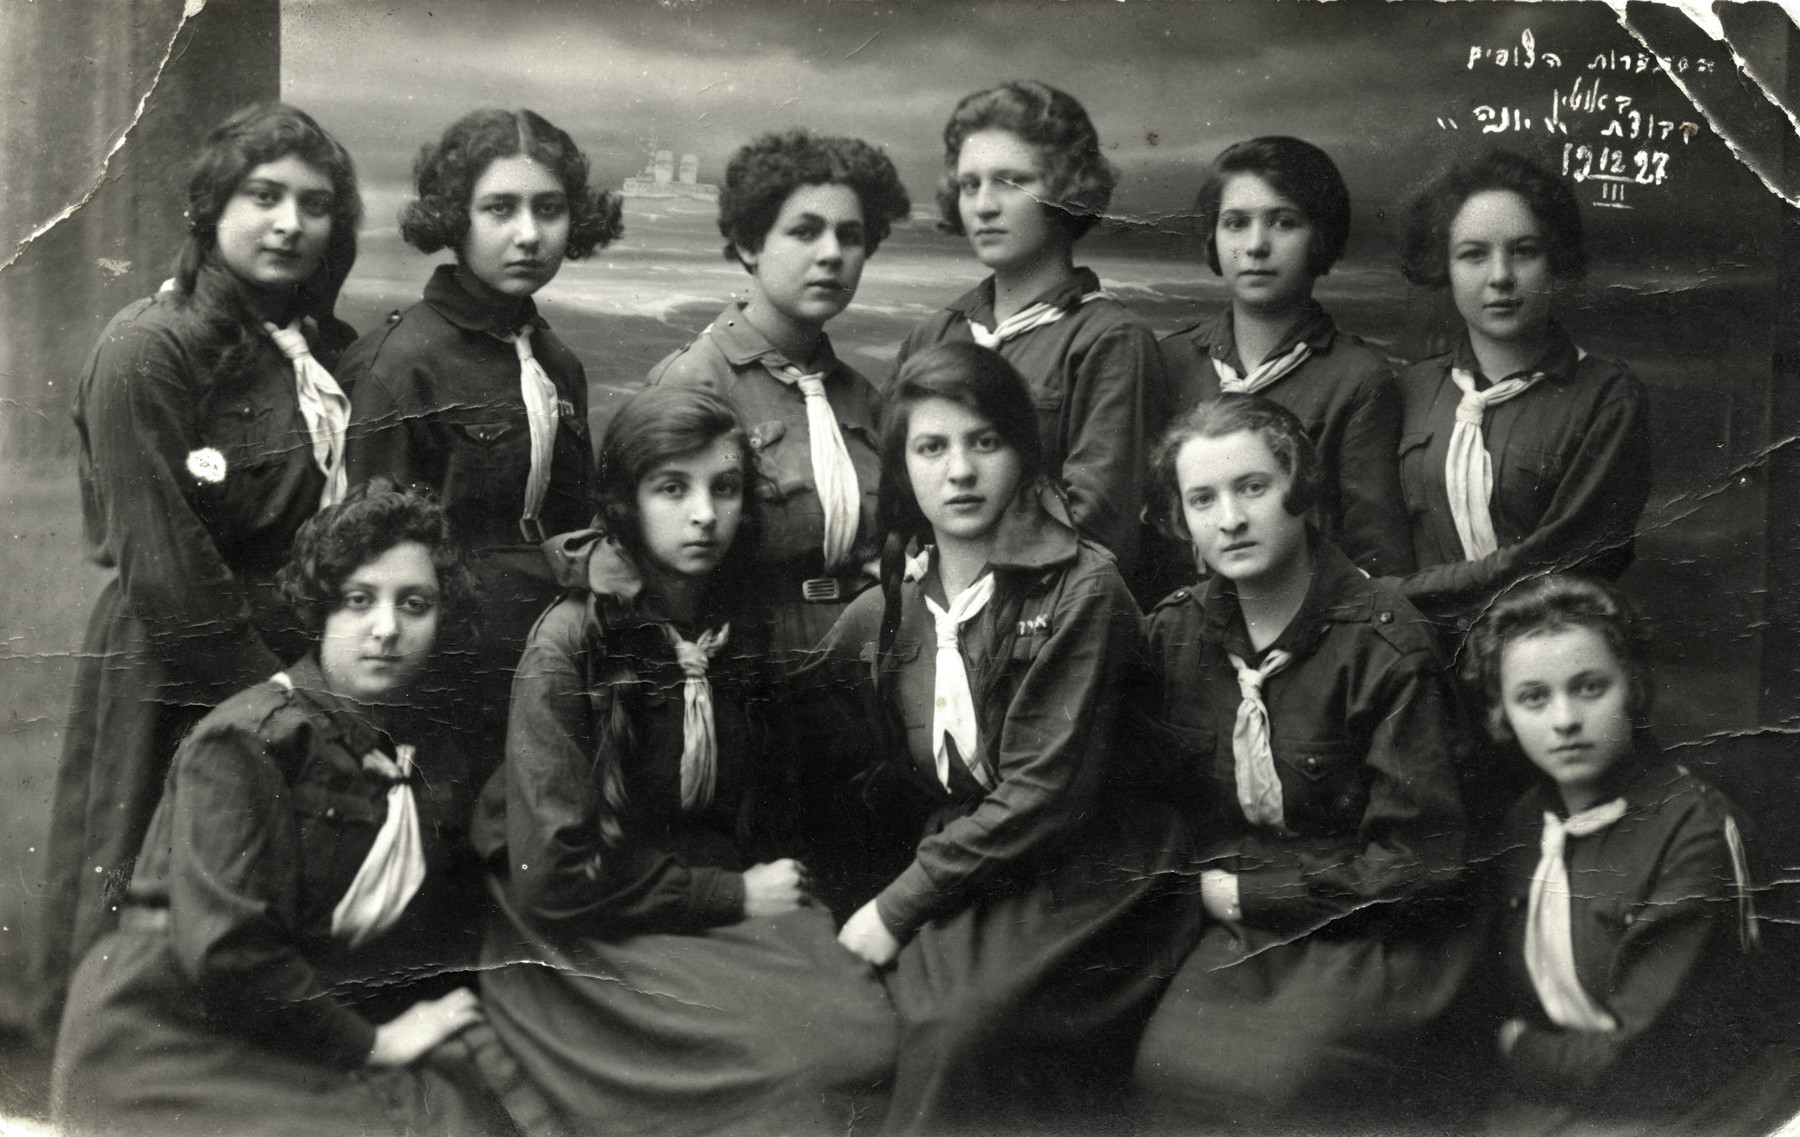 Group portrait of teenage girls in a Jewish scout unit in Utena.

Chana Rudashevsky is pictured in the top row, second from the right.